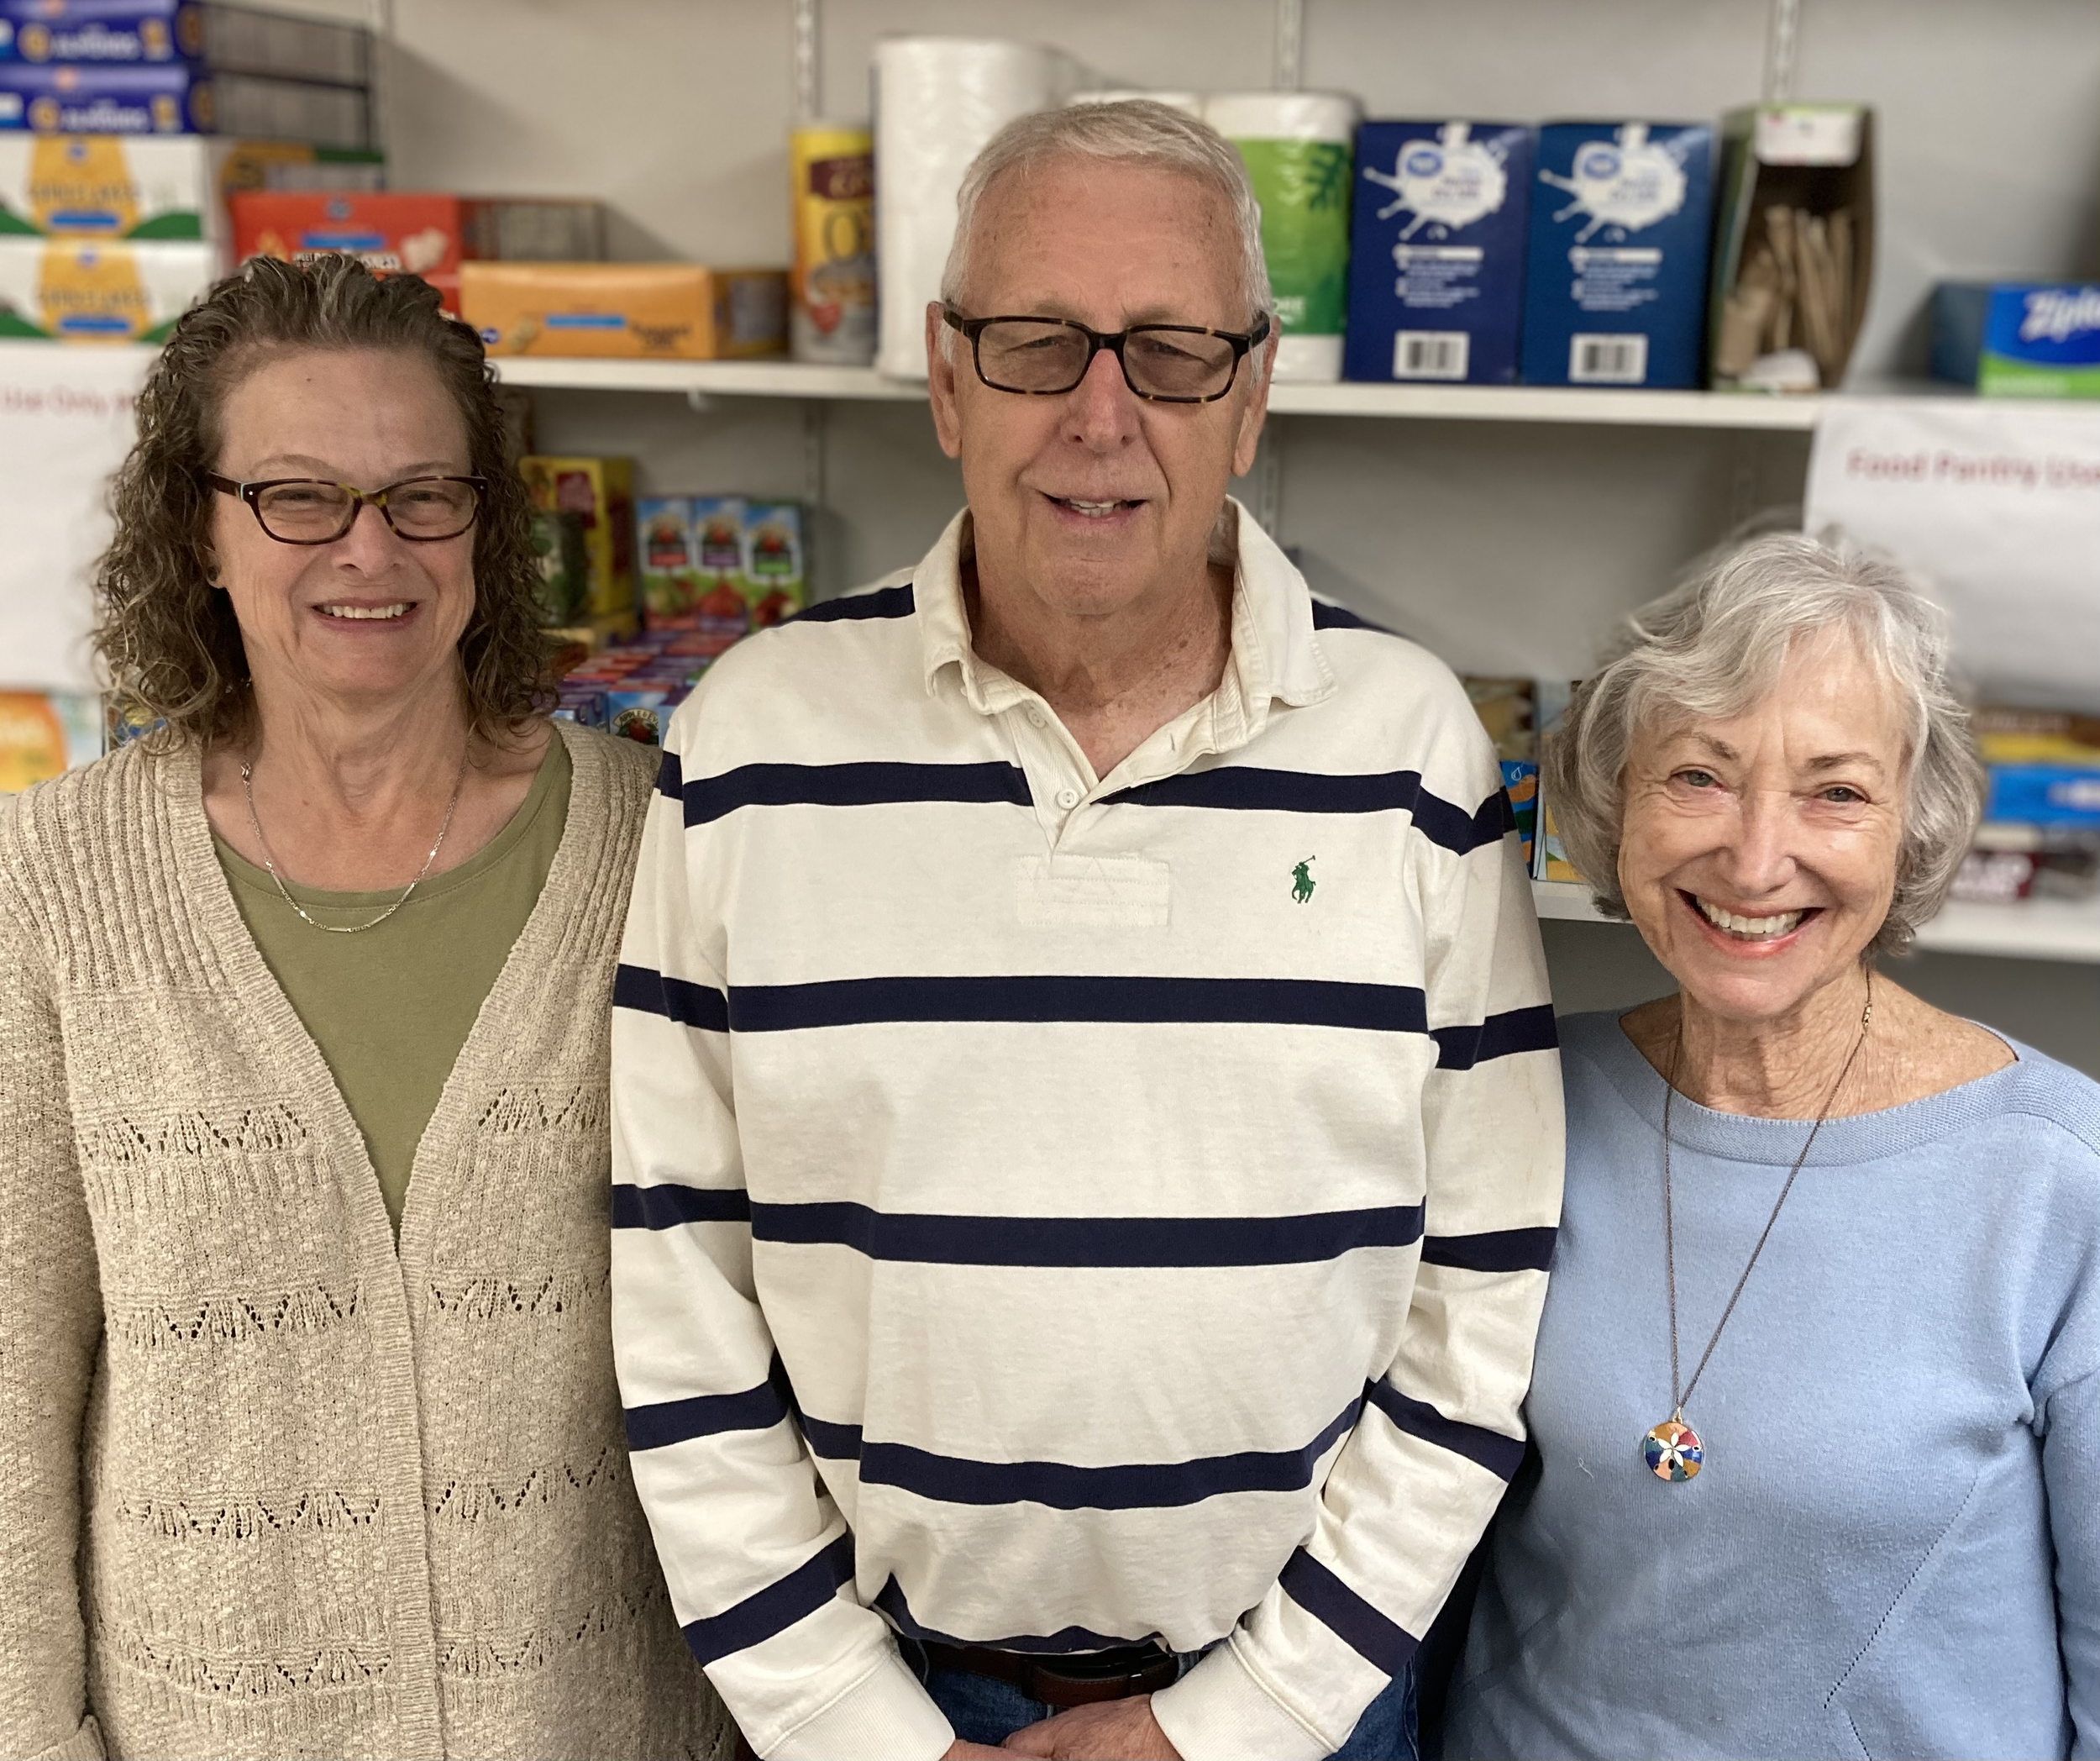 Tuesday volunteers, Christine, Bill, and Ruth